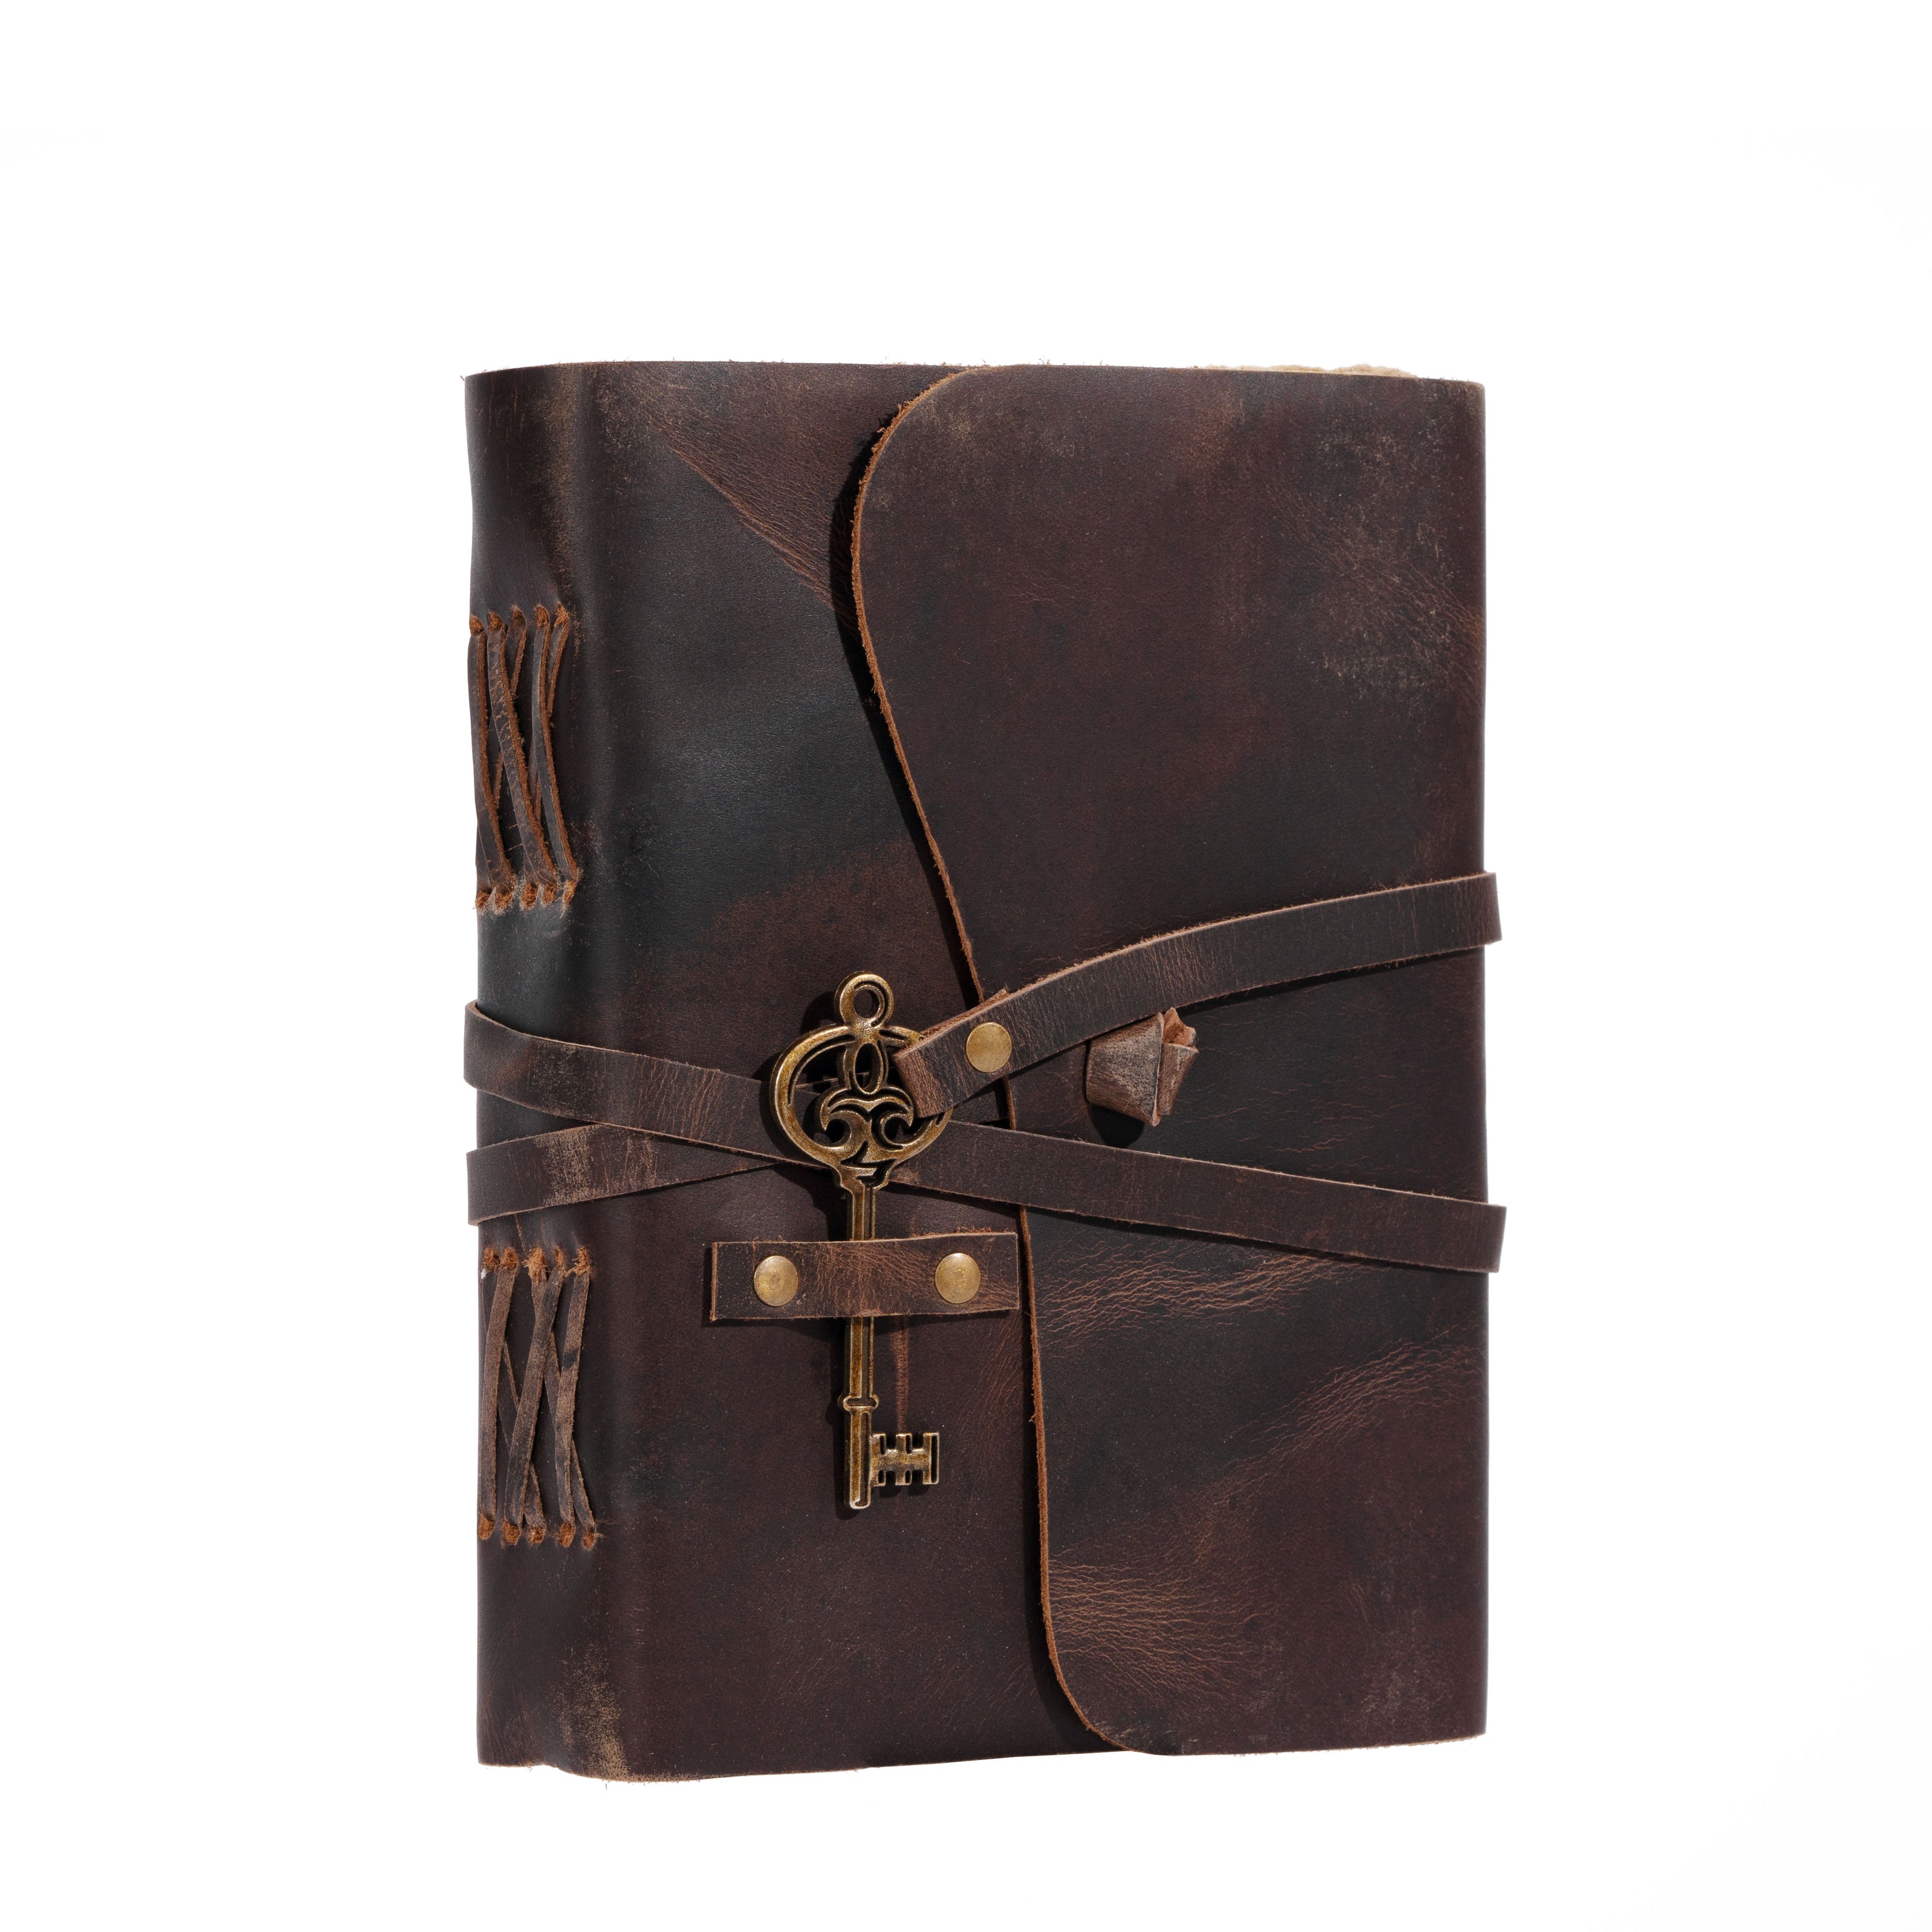 LEATHER HERITAGE Antique Key Leather Bound journal with deckle